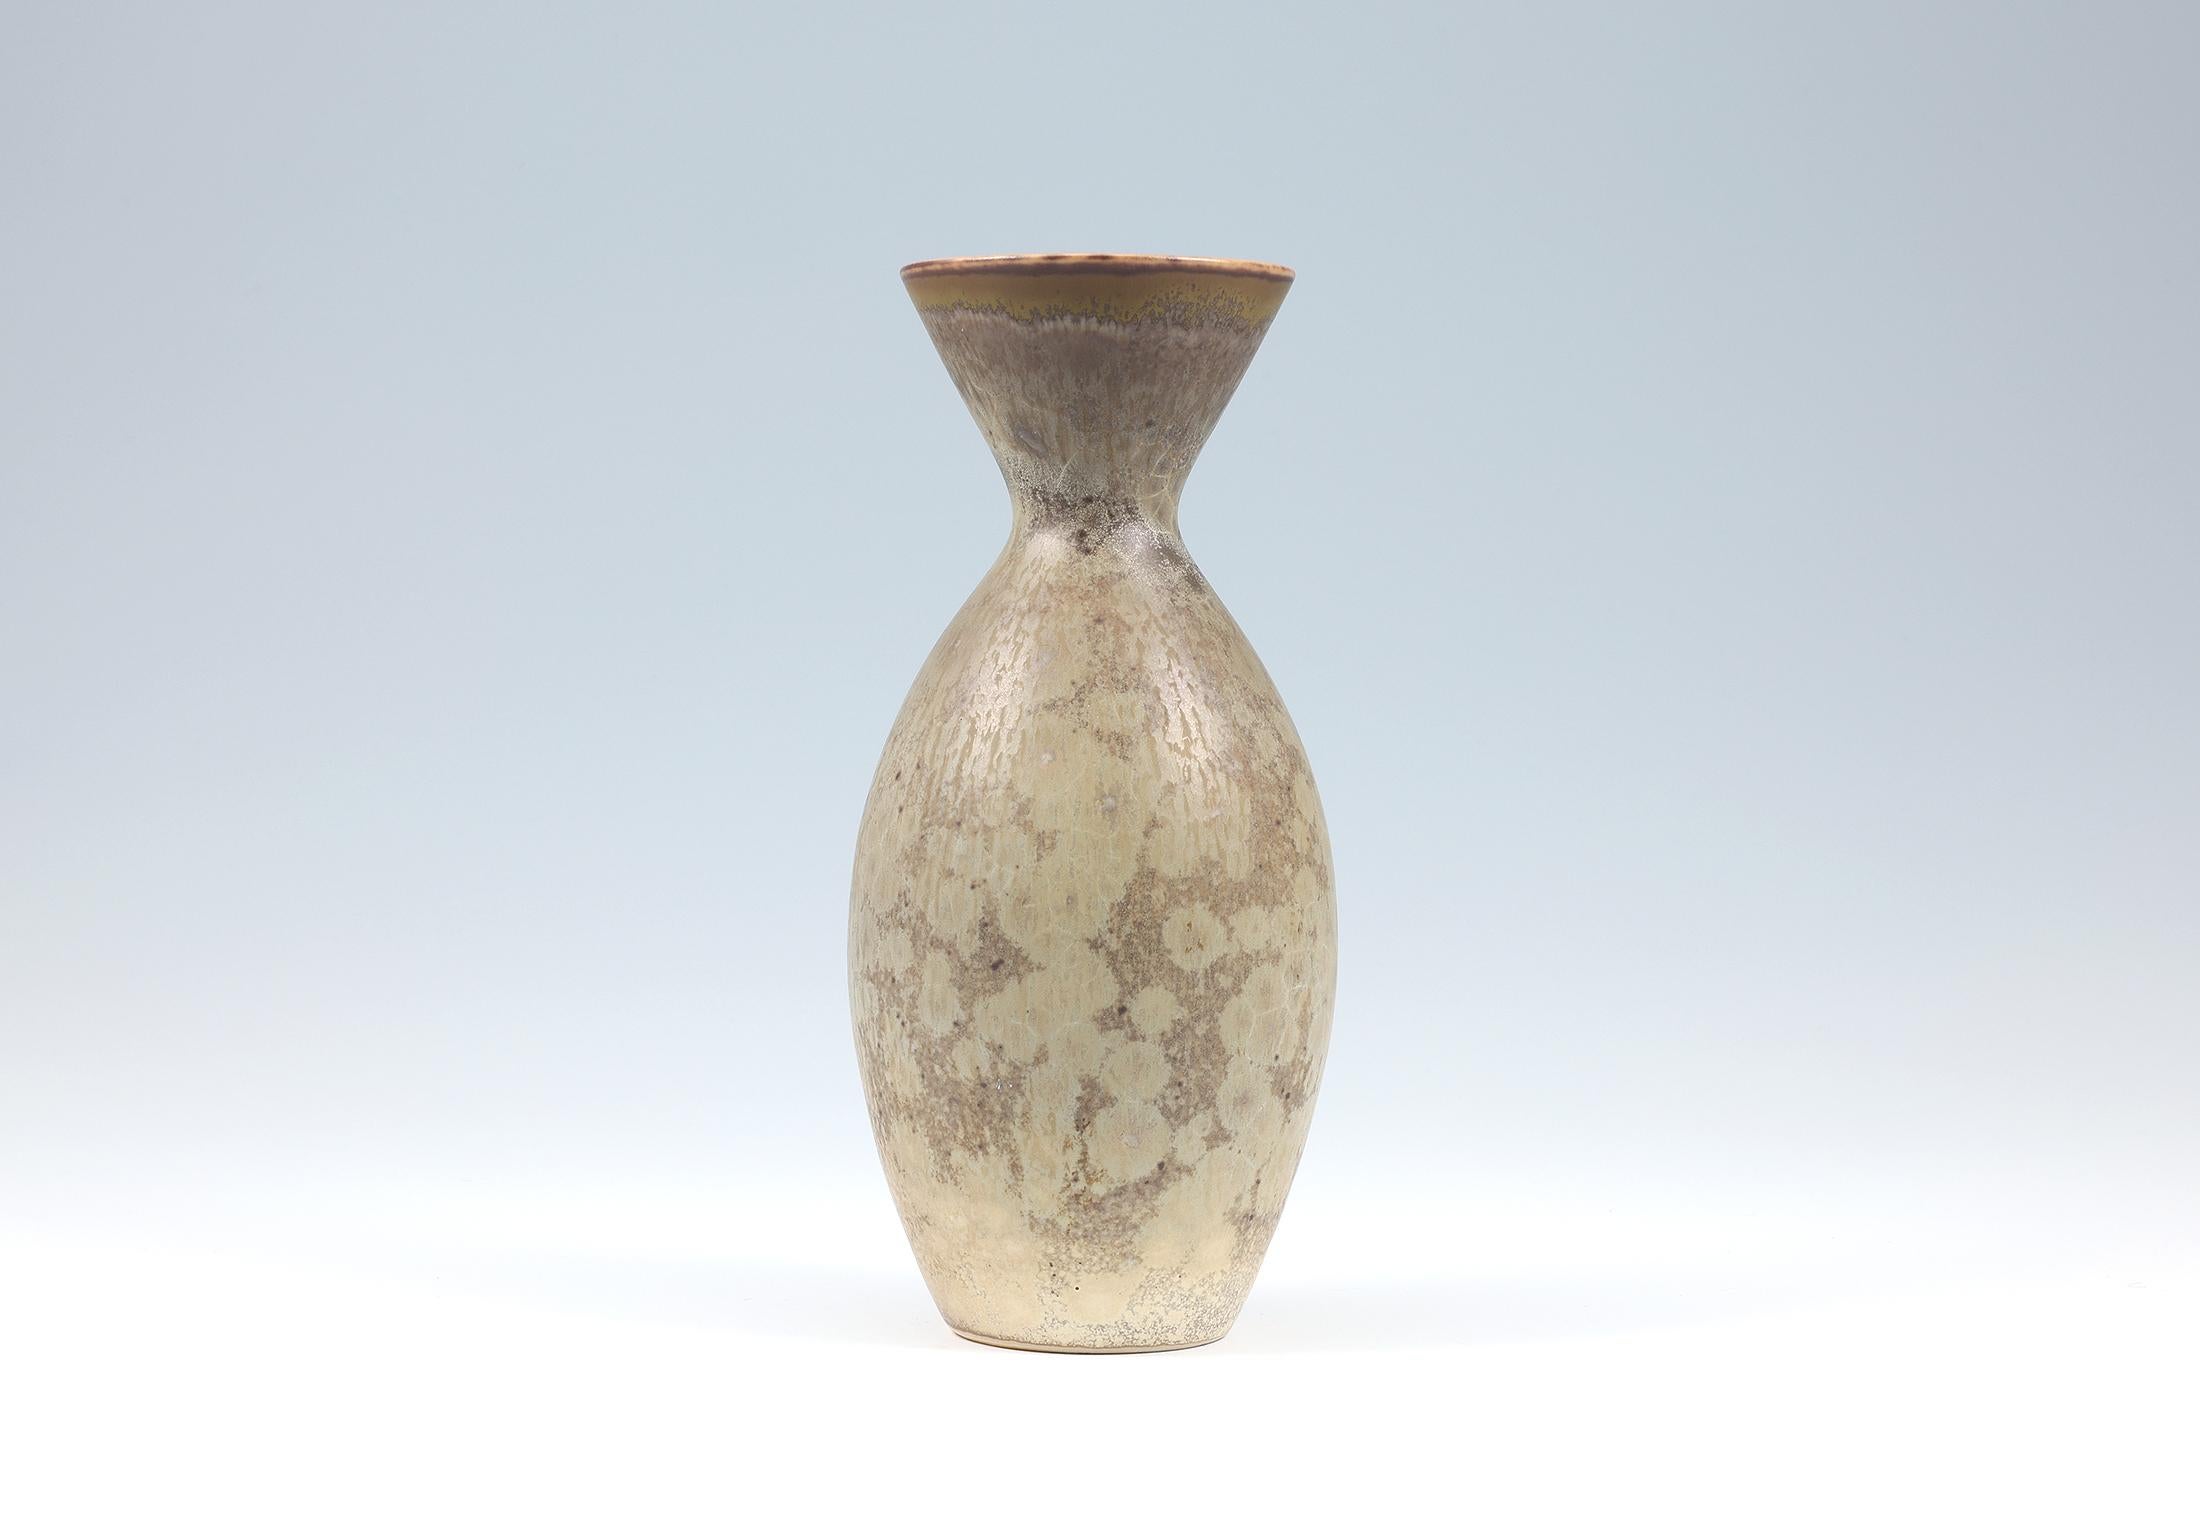 Carl-Harry Stålhane, Stoneware vase with crystale glaze, Rörstrand, Sweden 1950's Impressed Rörstrand R three crowns CHS SWEDEN

The entire surface of the vase is covered with a thin brown glazed surface, which is then covered with a double layer of